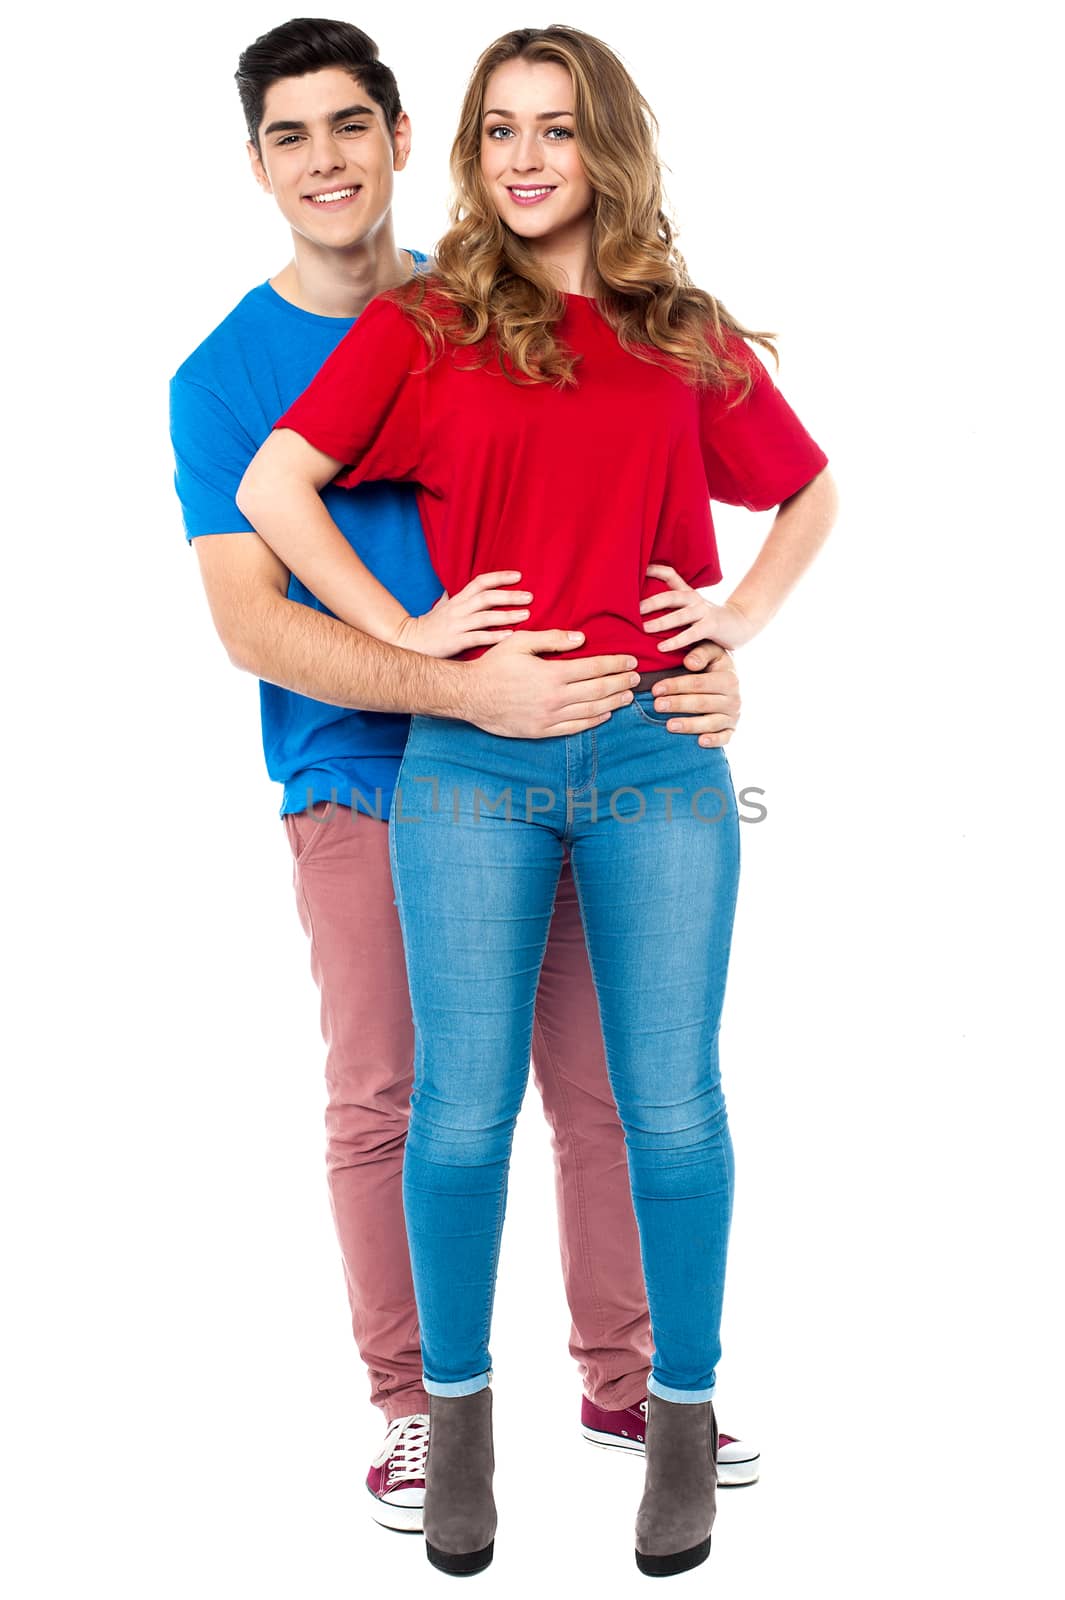 Handsome young man embracing his girlfriend from behind, arms around her waist